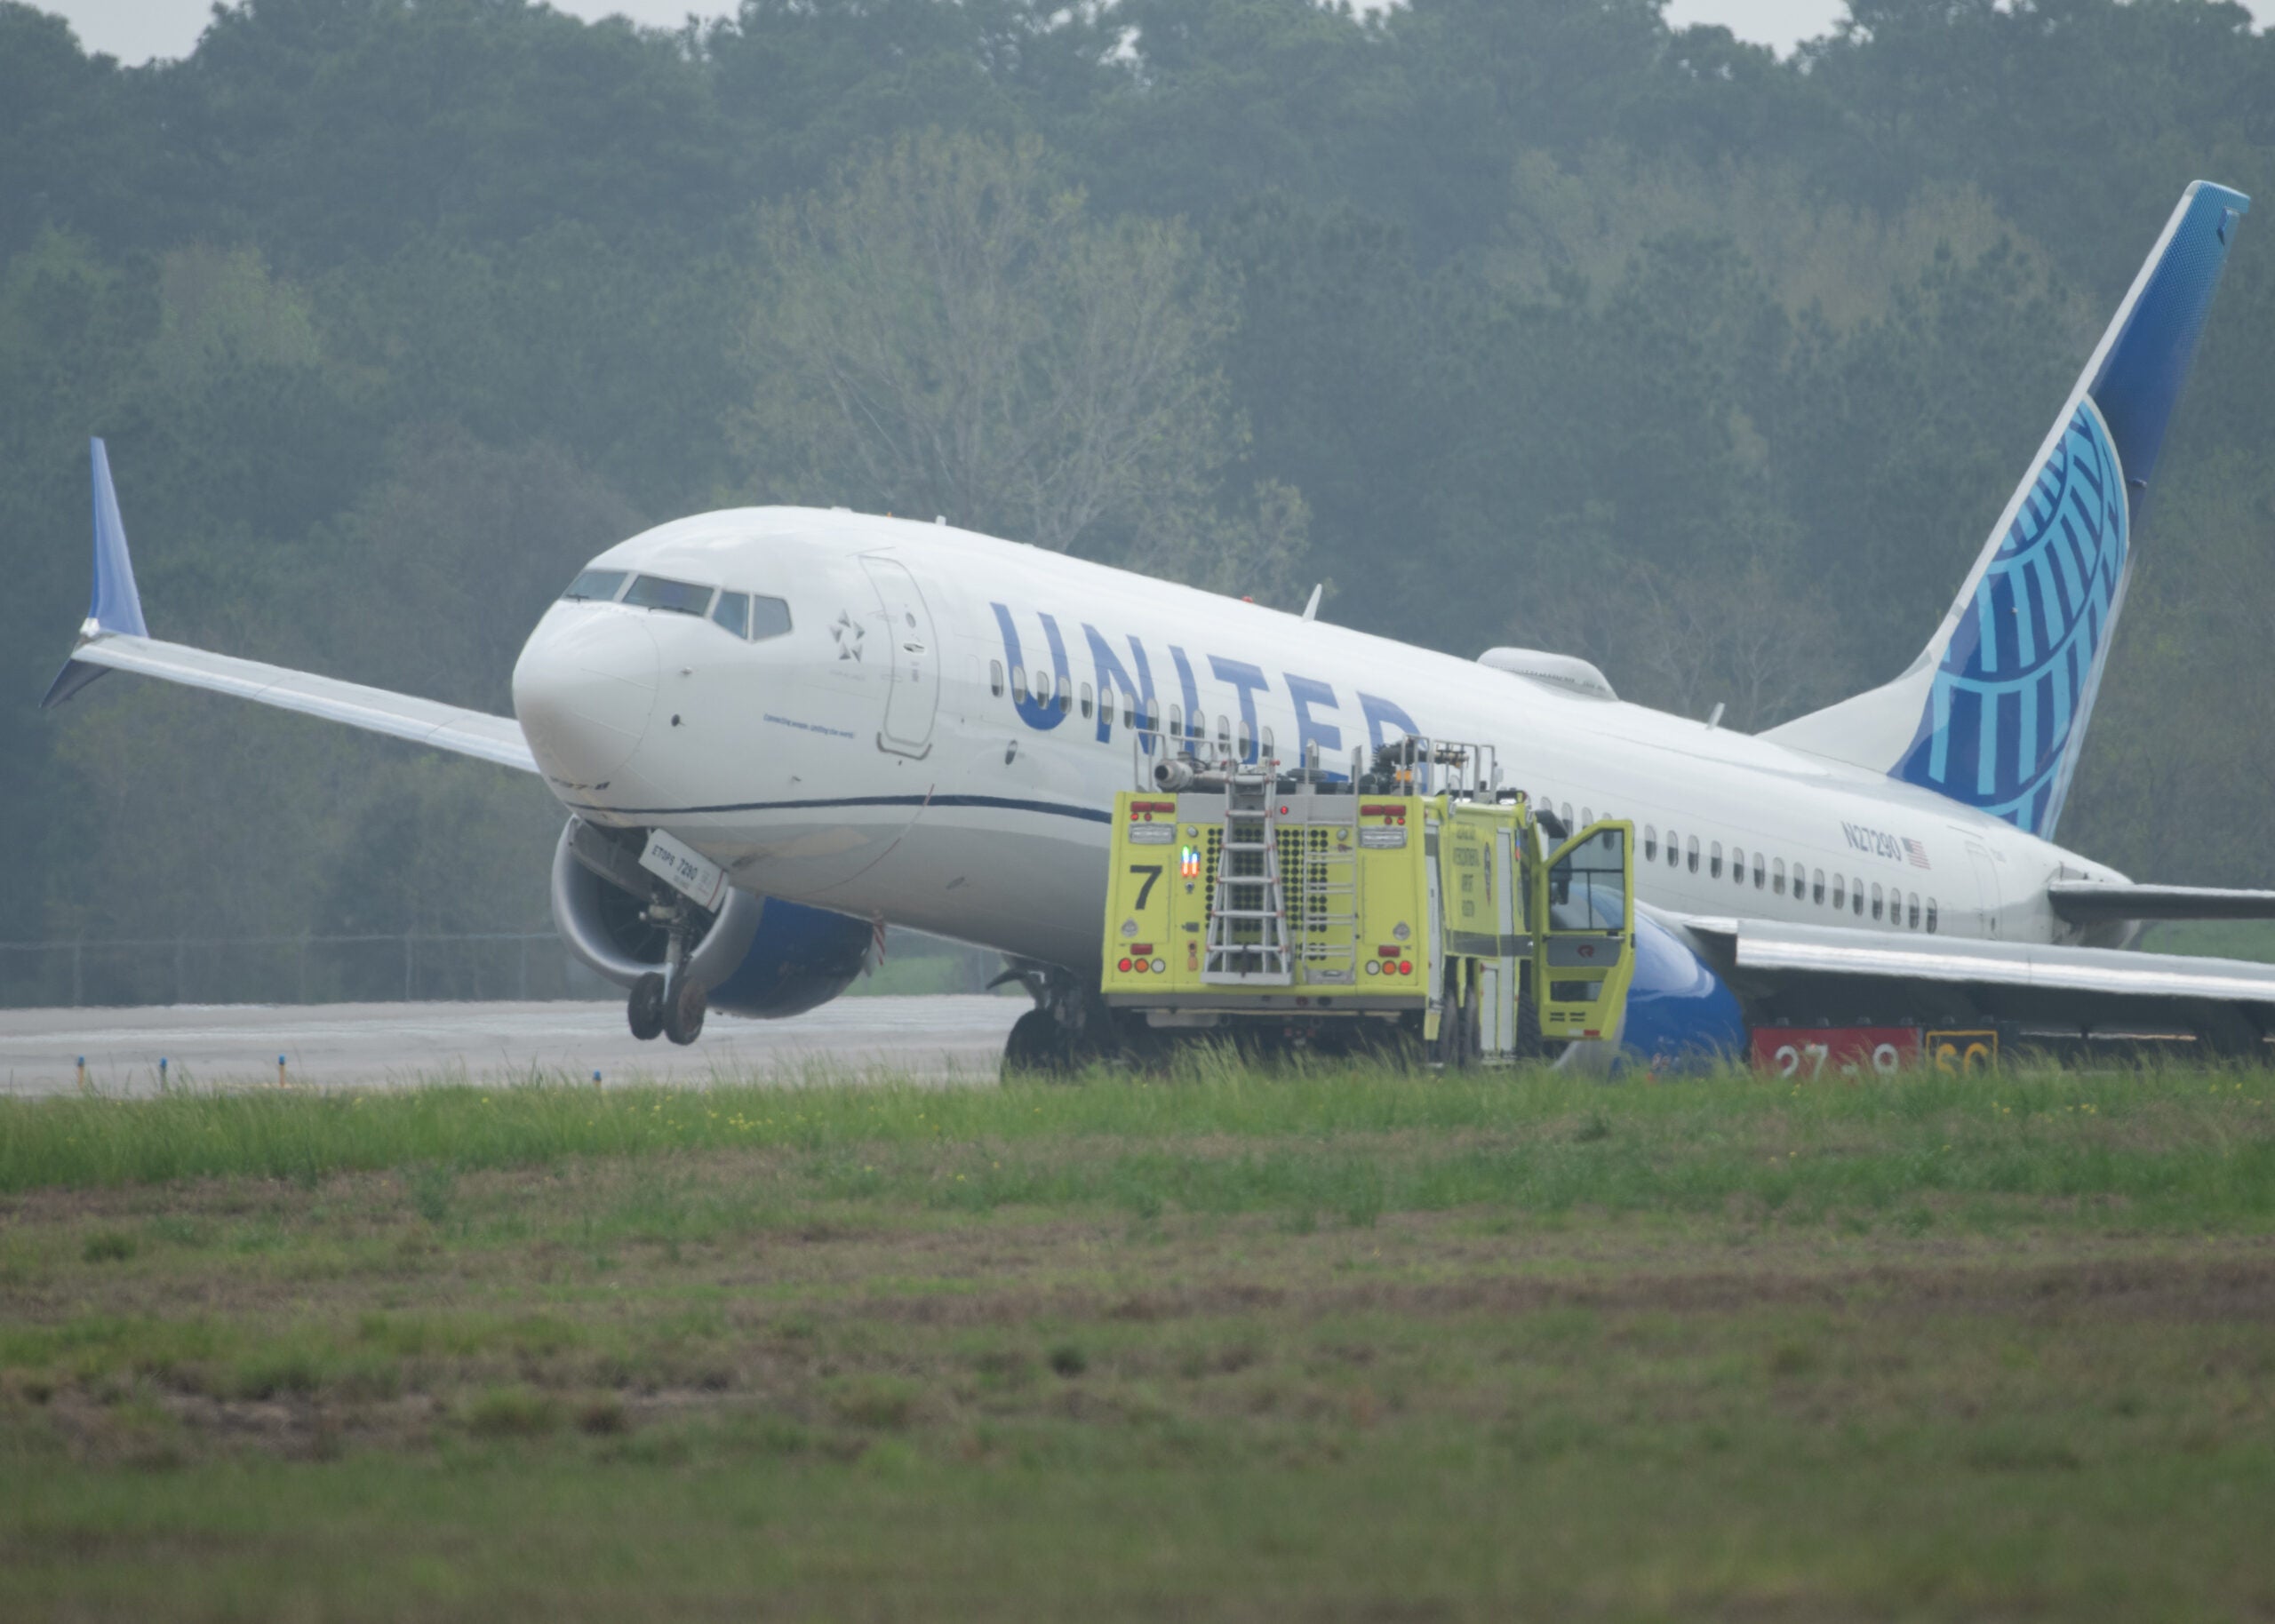 United Airlines Jet IAH runway excursion